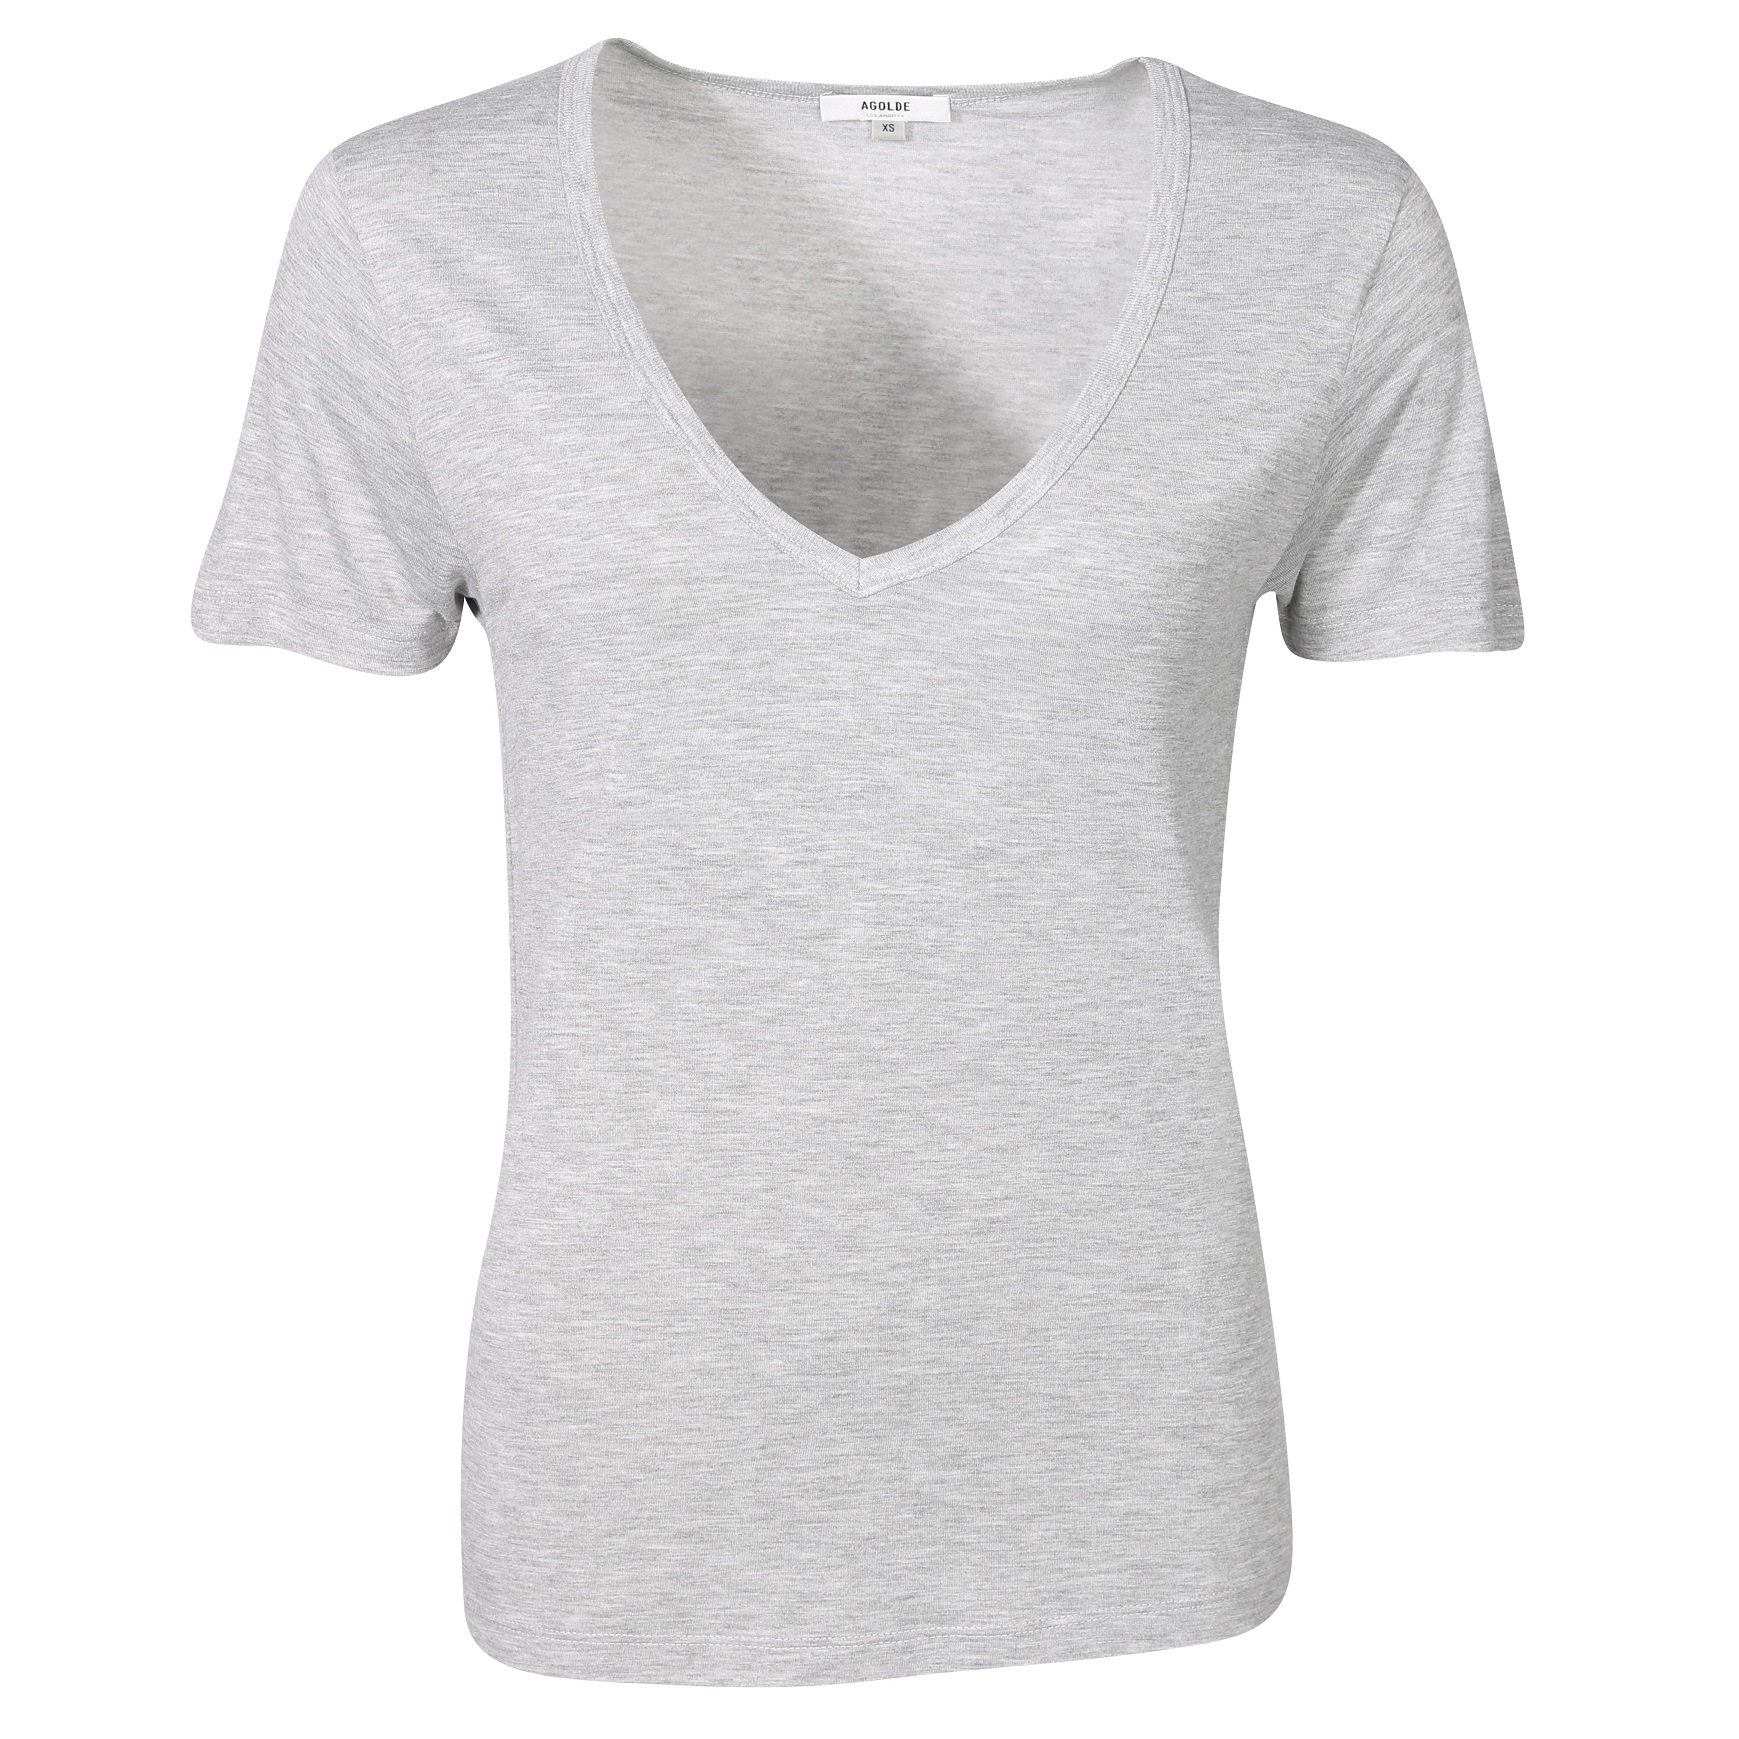 AGOLDE Cameron V-Neck Tee in Heather Grey XS